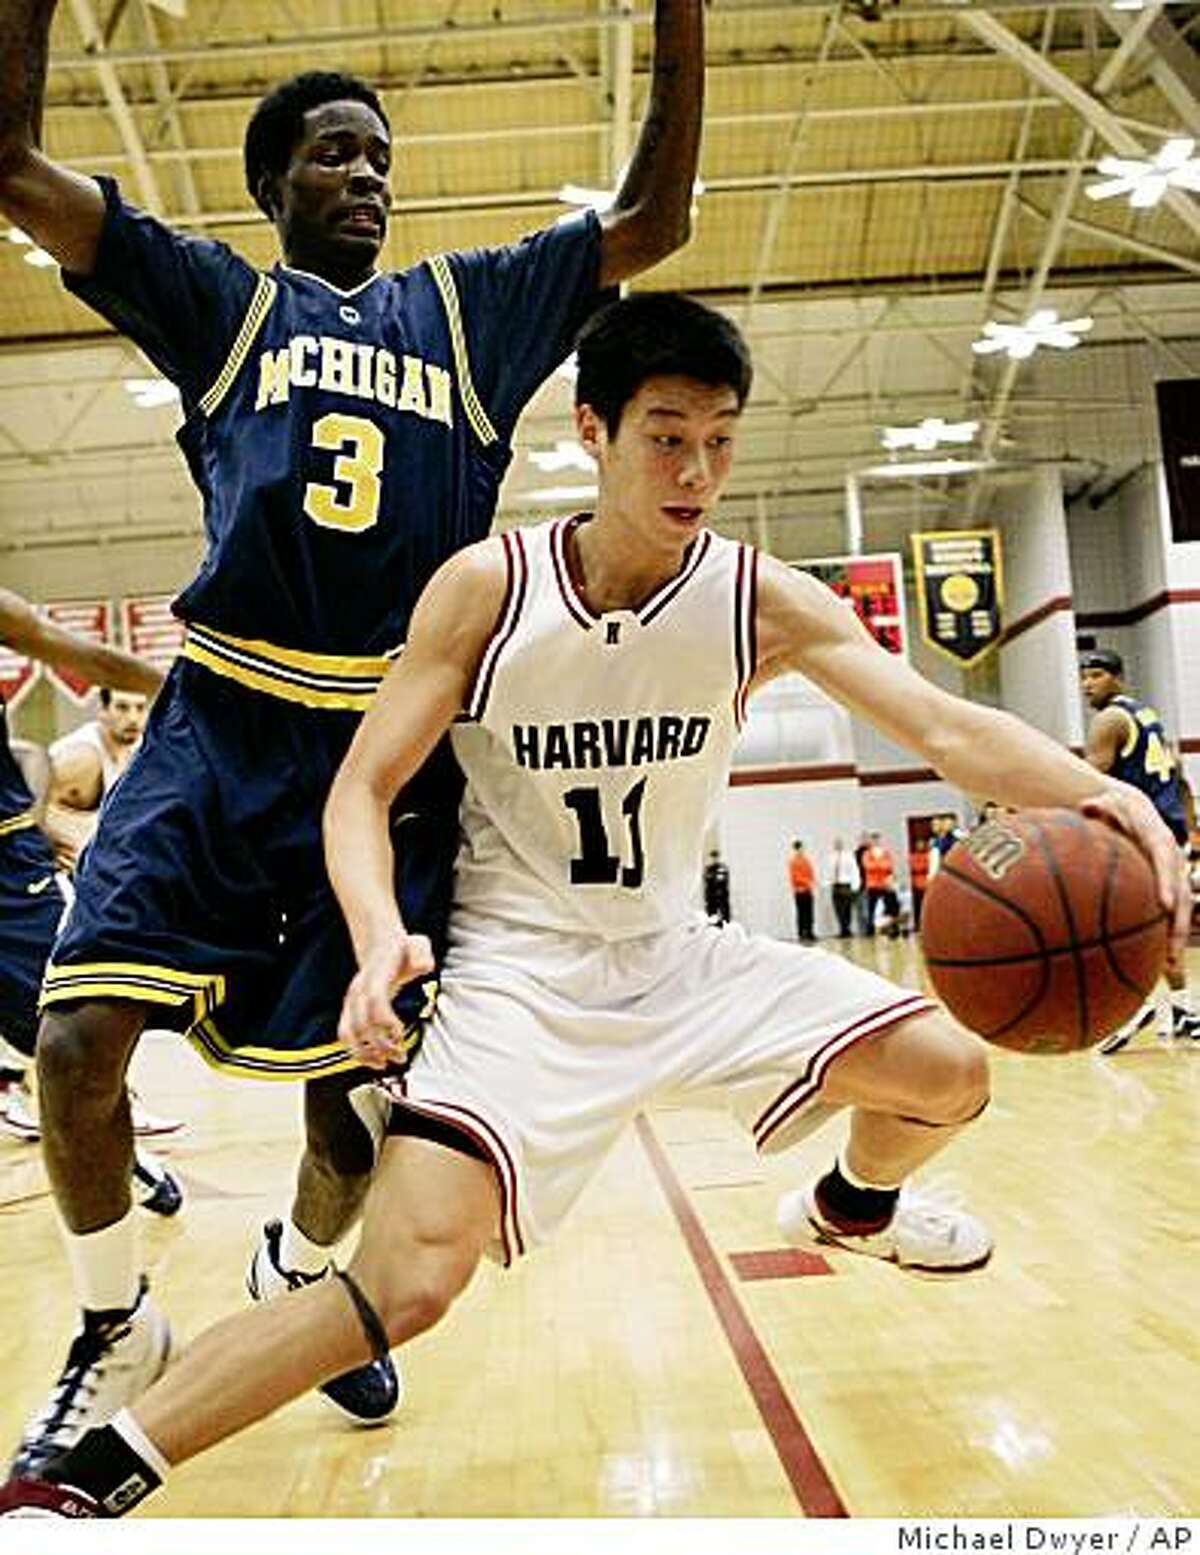 Harvard's Jeremy Lin (11) keeps the ball away from Michigan's Manny Harris (3) in the second half of a basketball game Saturday, Dec. 1, 2007, in Boston. Harvard won 62-51. (AP Photo/Michael Dwyer)